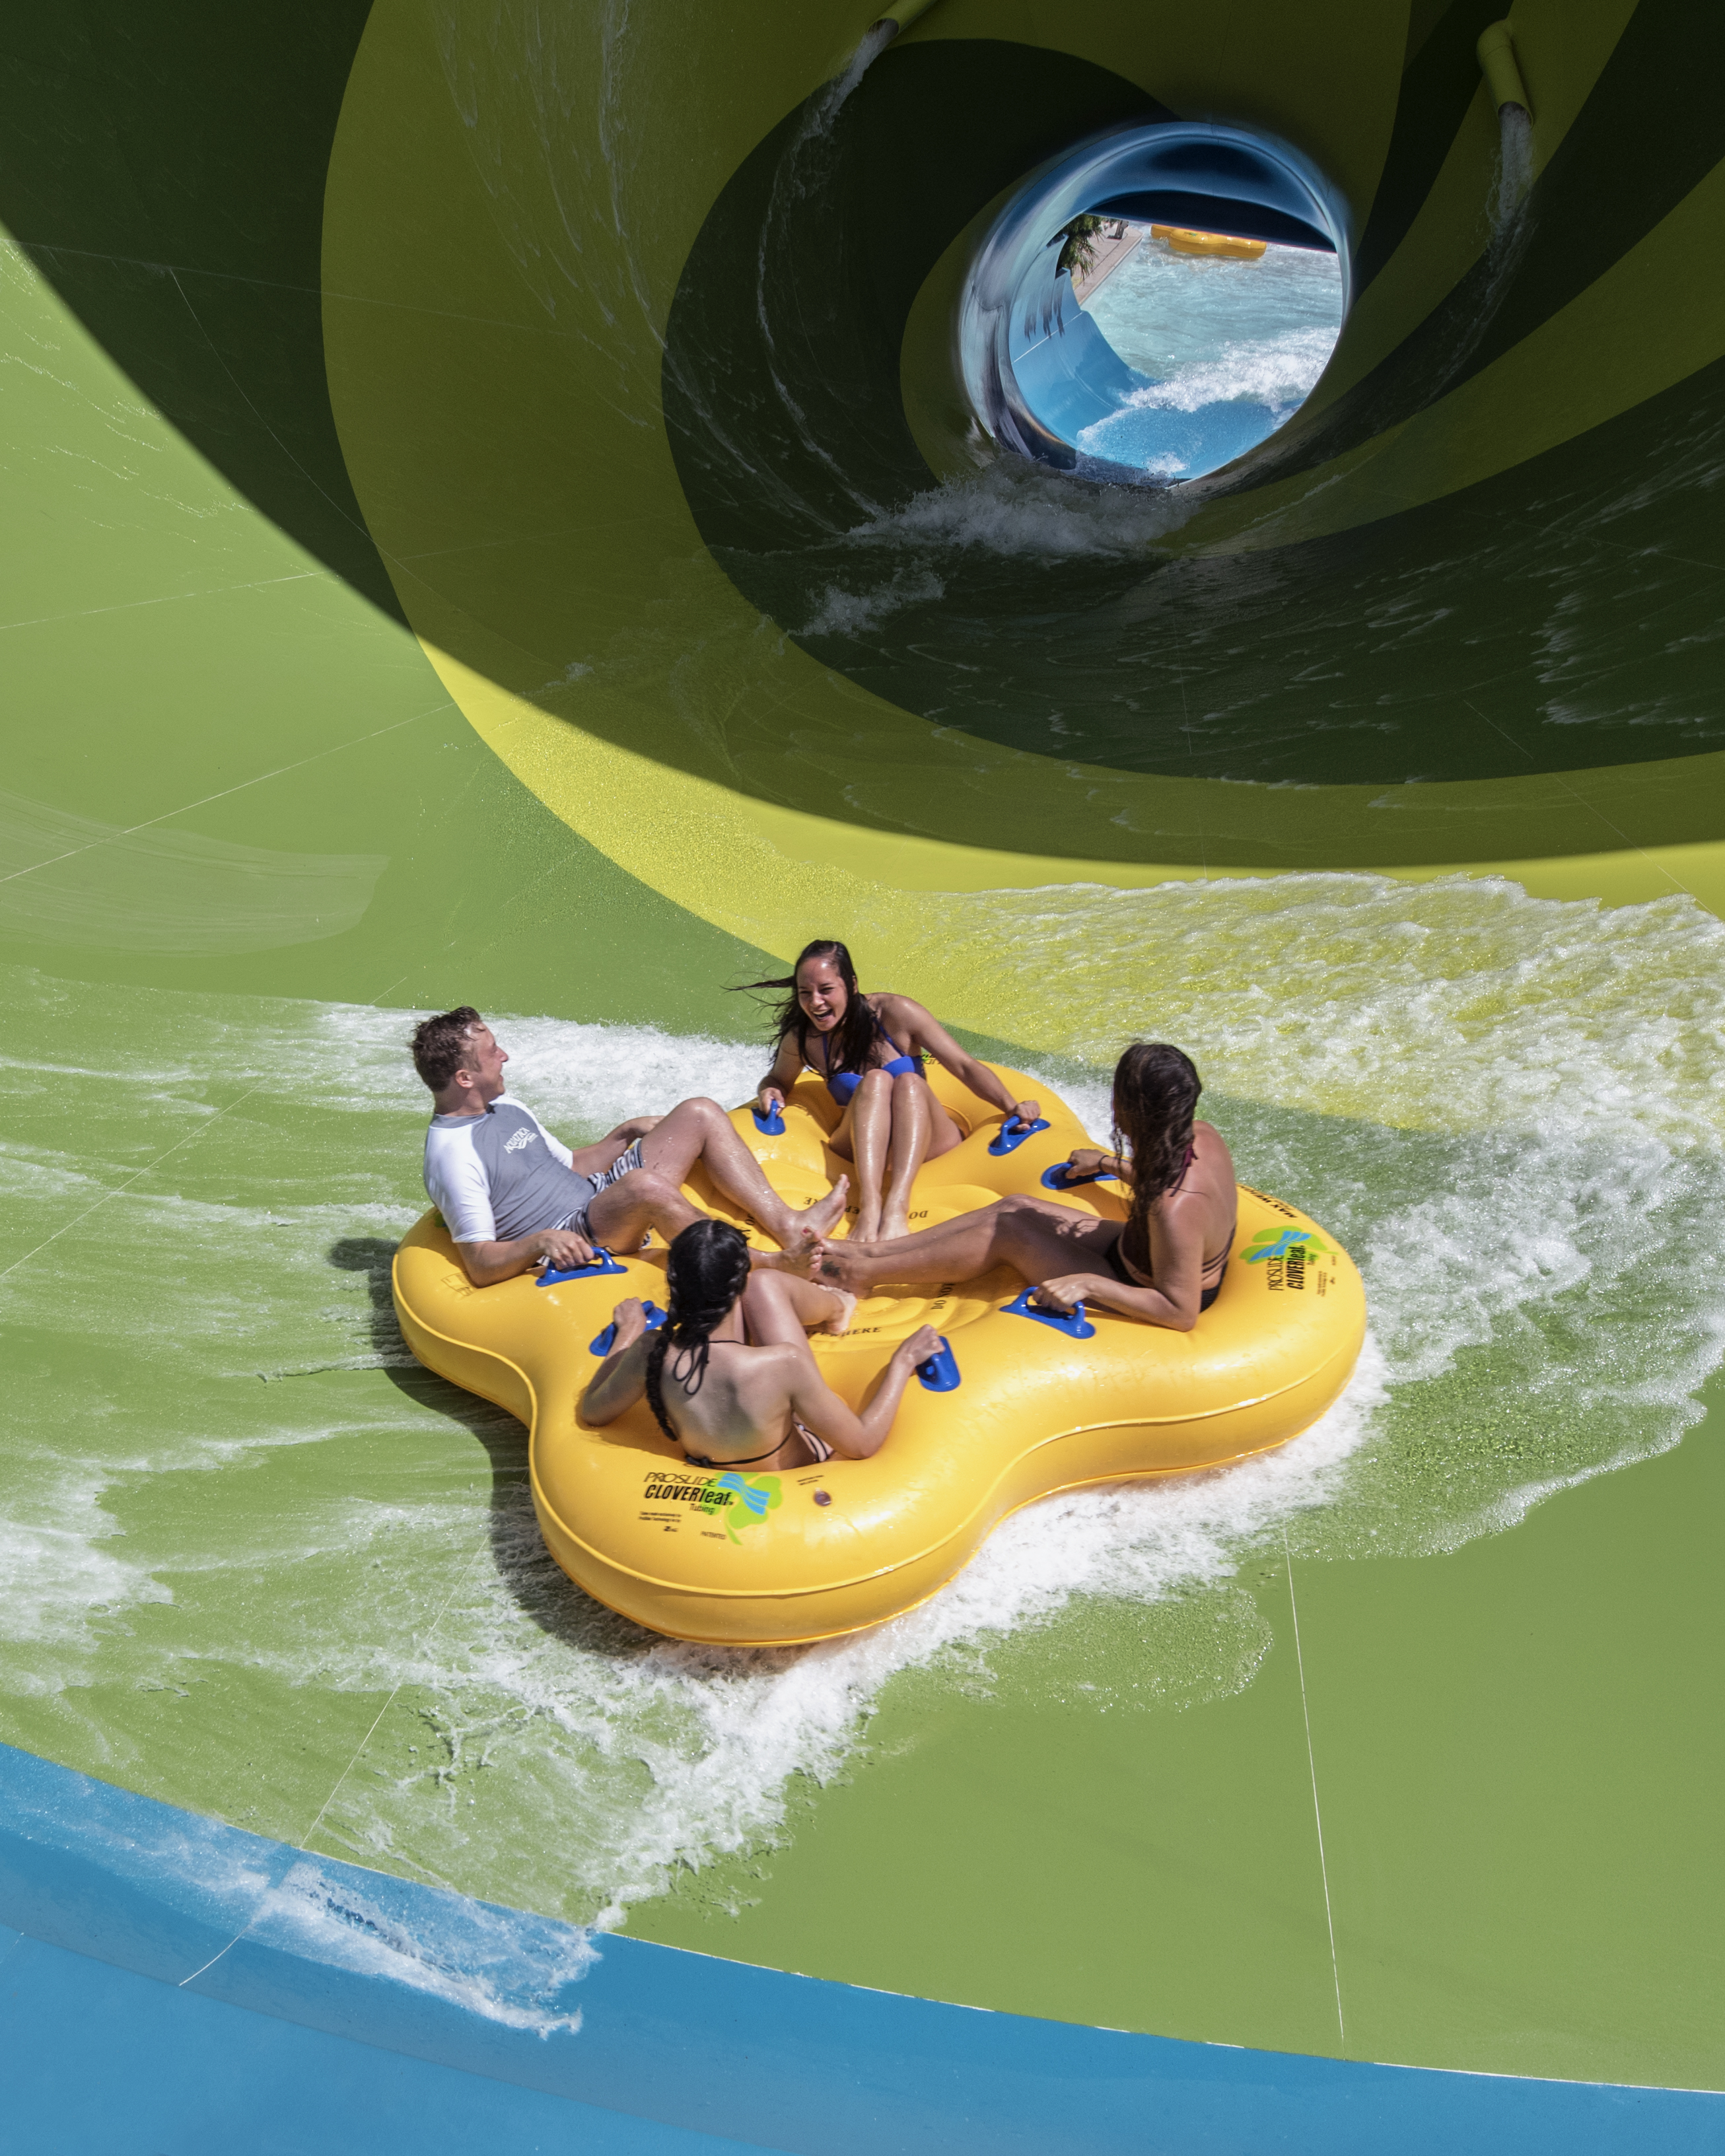 Behind The Thrills Get Ready To Splash At Aquatica San Diego On May 24 Amusement Parks Guides News